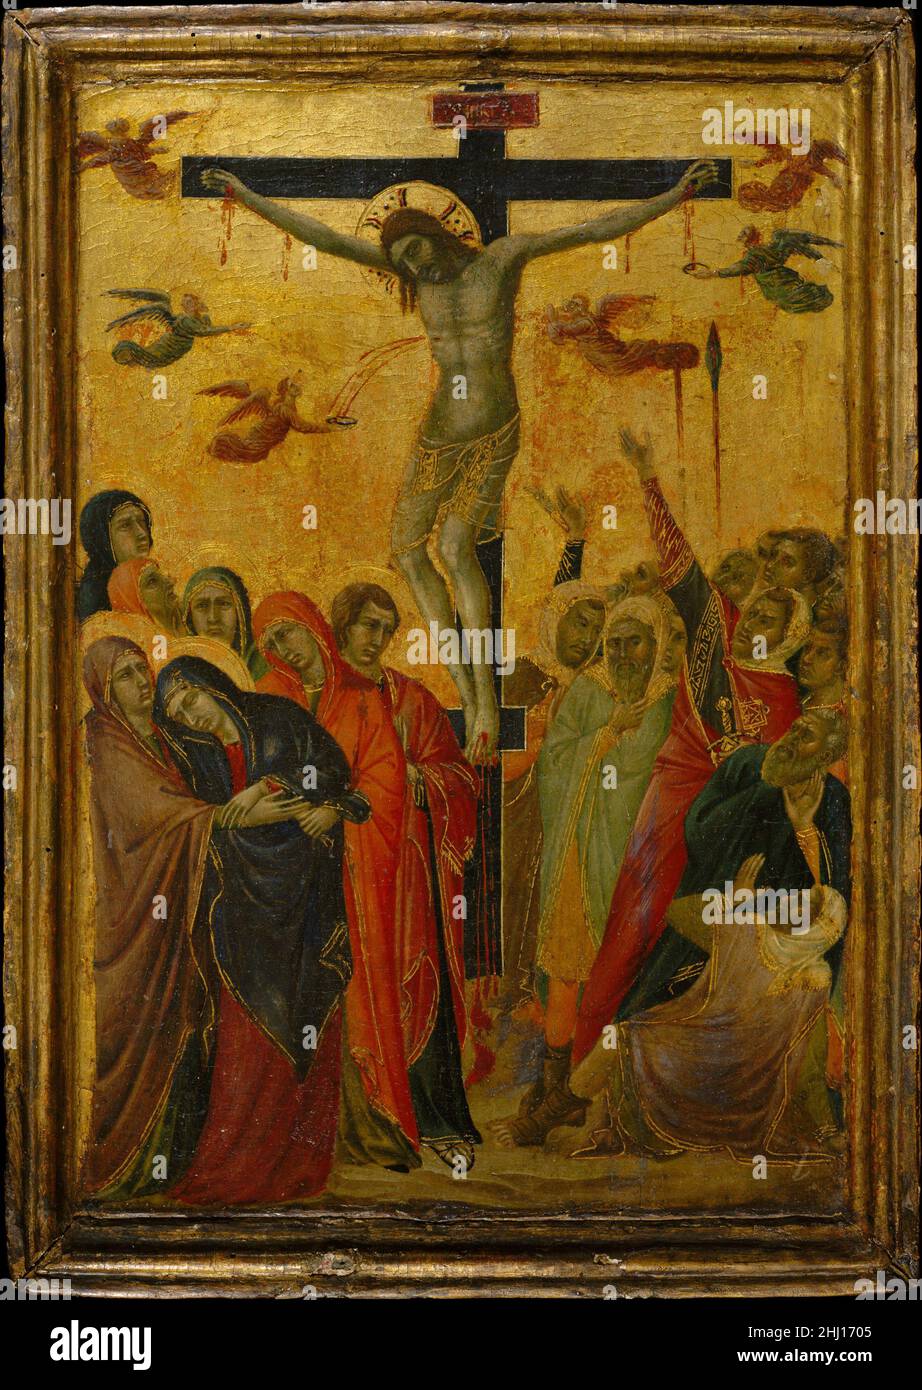 The Crucifixion ca. 1315 Segna di Buonaventura Italian This panel and another in the Lehman Collection portraying the Madonna and Child (1975.1.1) formed a diptych (two panels hinged together so they could open and close) and would have been used for private devotion. The radiant beauty of the Virgin’s court, enhanced by the ornamental detail, contrasts with the tragic drama of the Crucifixion, thus offering the worshipper two very different images on which to meditate. These panels reveal Segna di Buonaventura’s appropriation of the language and motifs of his master, Duccio. The greatest Sien Stock Photo